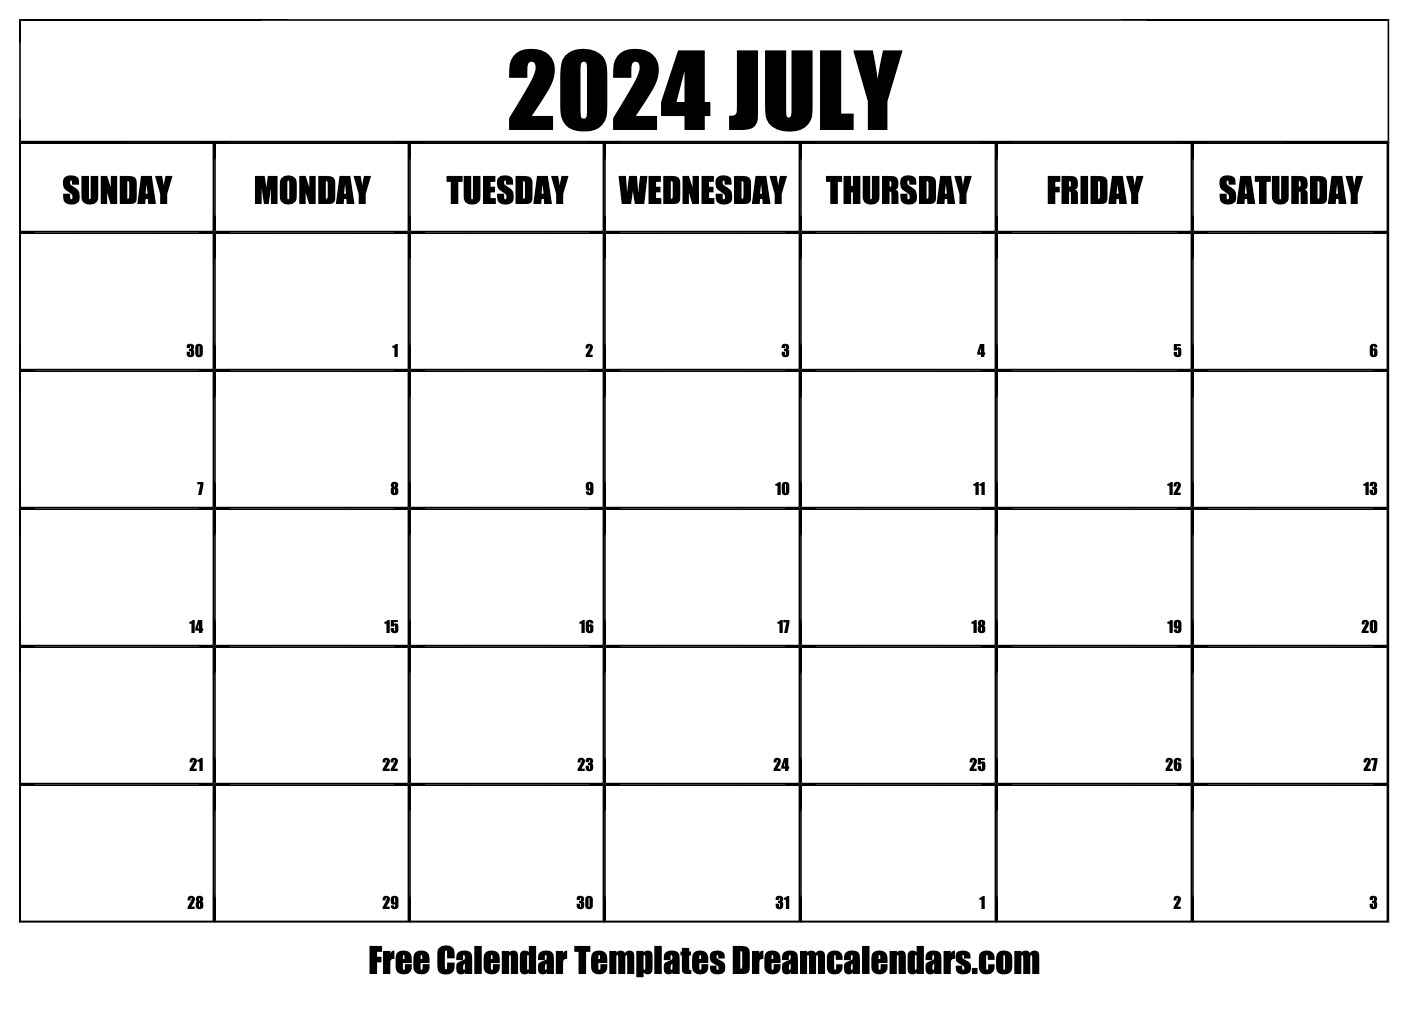 July 2024 Calendar | Free Blank Printable With Holidays for July 2024 Weekly Calendar Printable